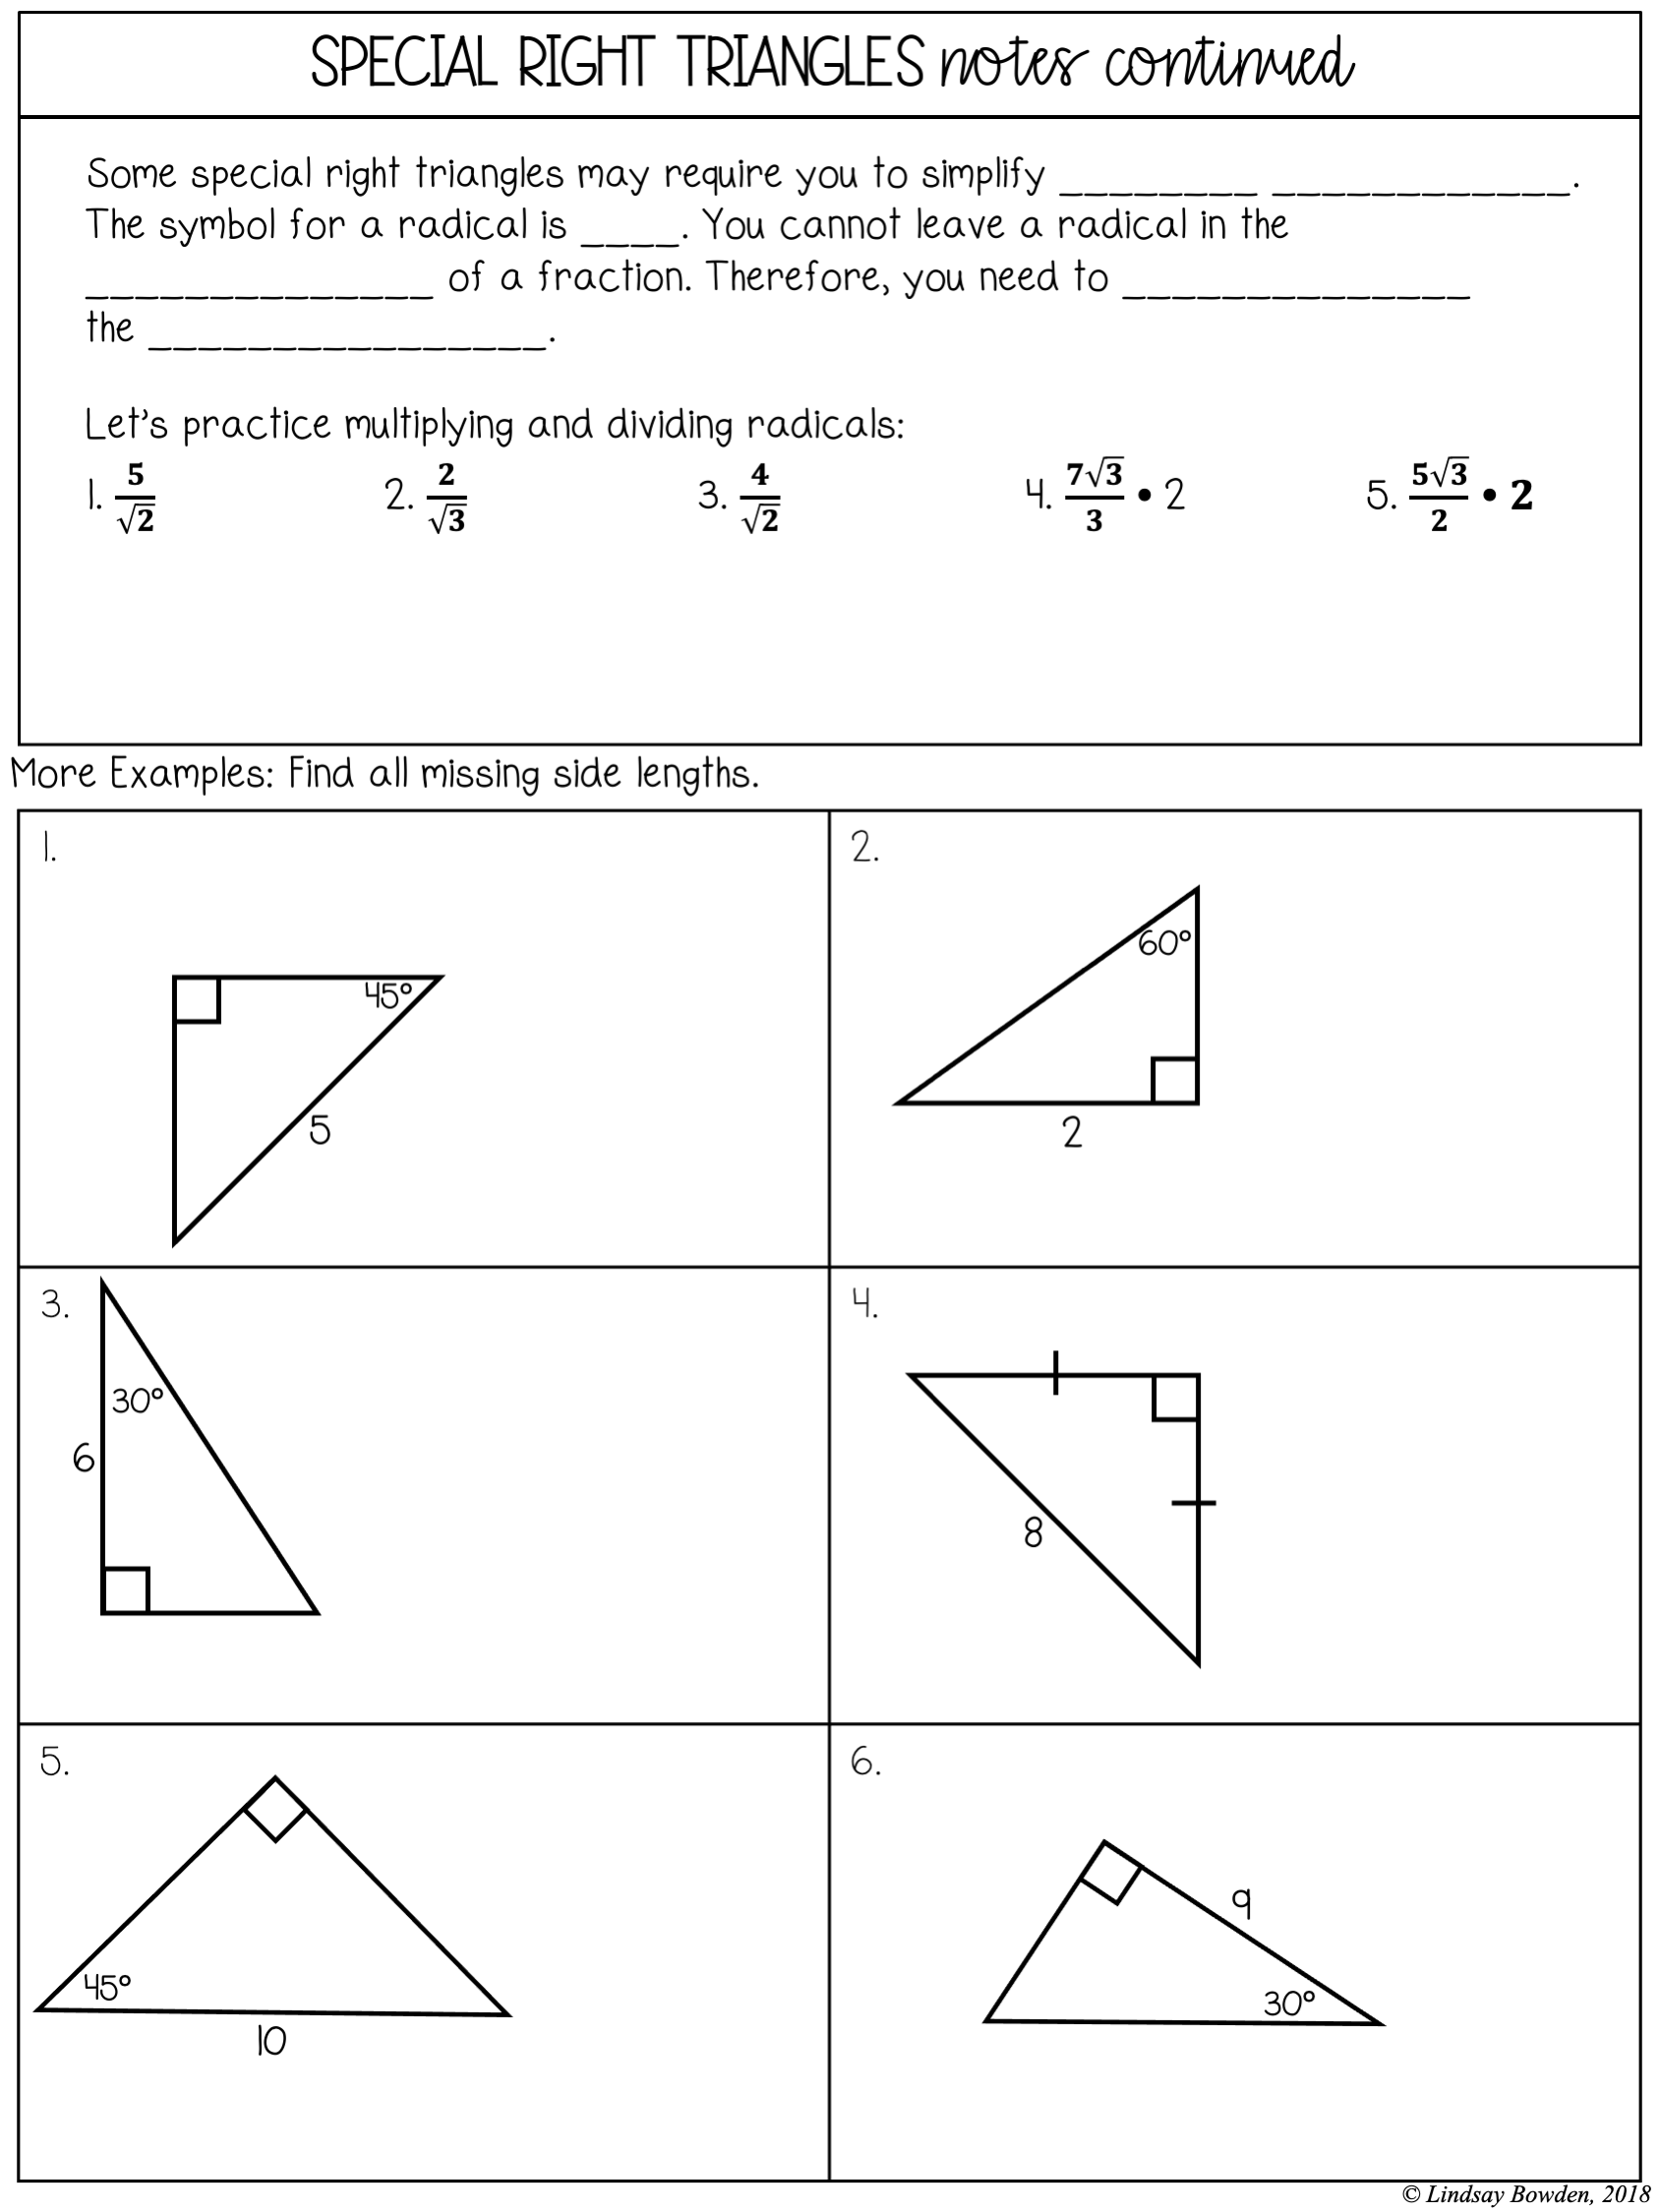 Special Right Triangles Notes and Worksheets - Lindsay Bowden In 5 8 Special Right Triangles Worksheet%